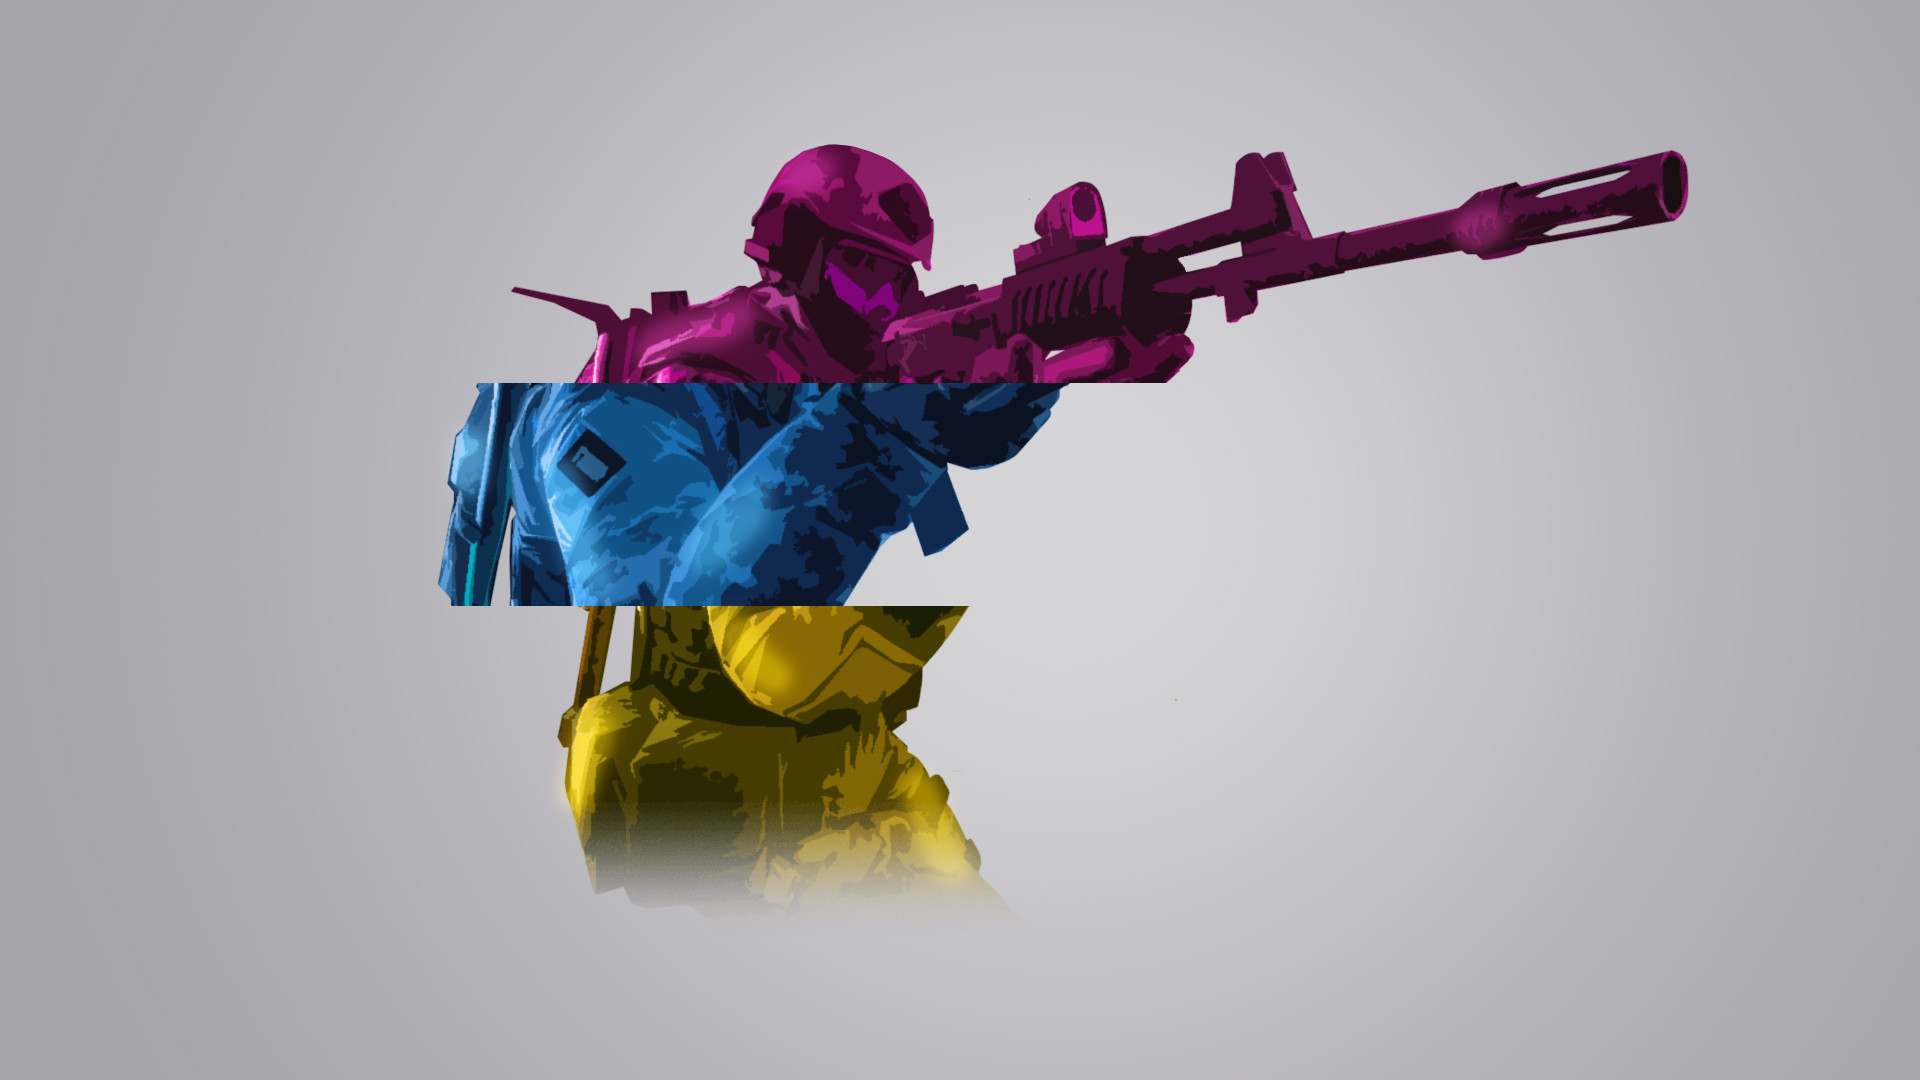 cs go wallpaper 1920x1080 hd,purple,toy,fictional character,action figure,animation